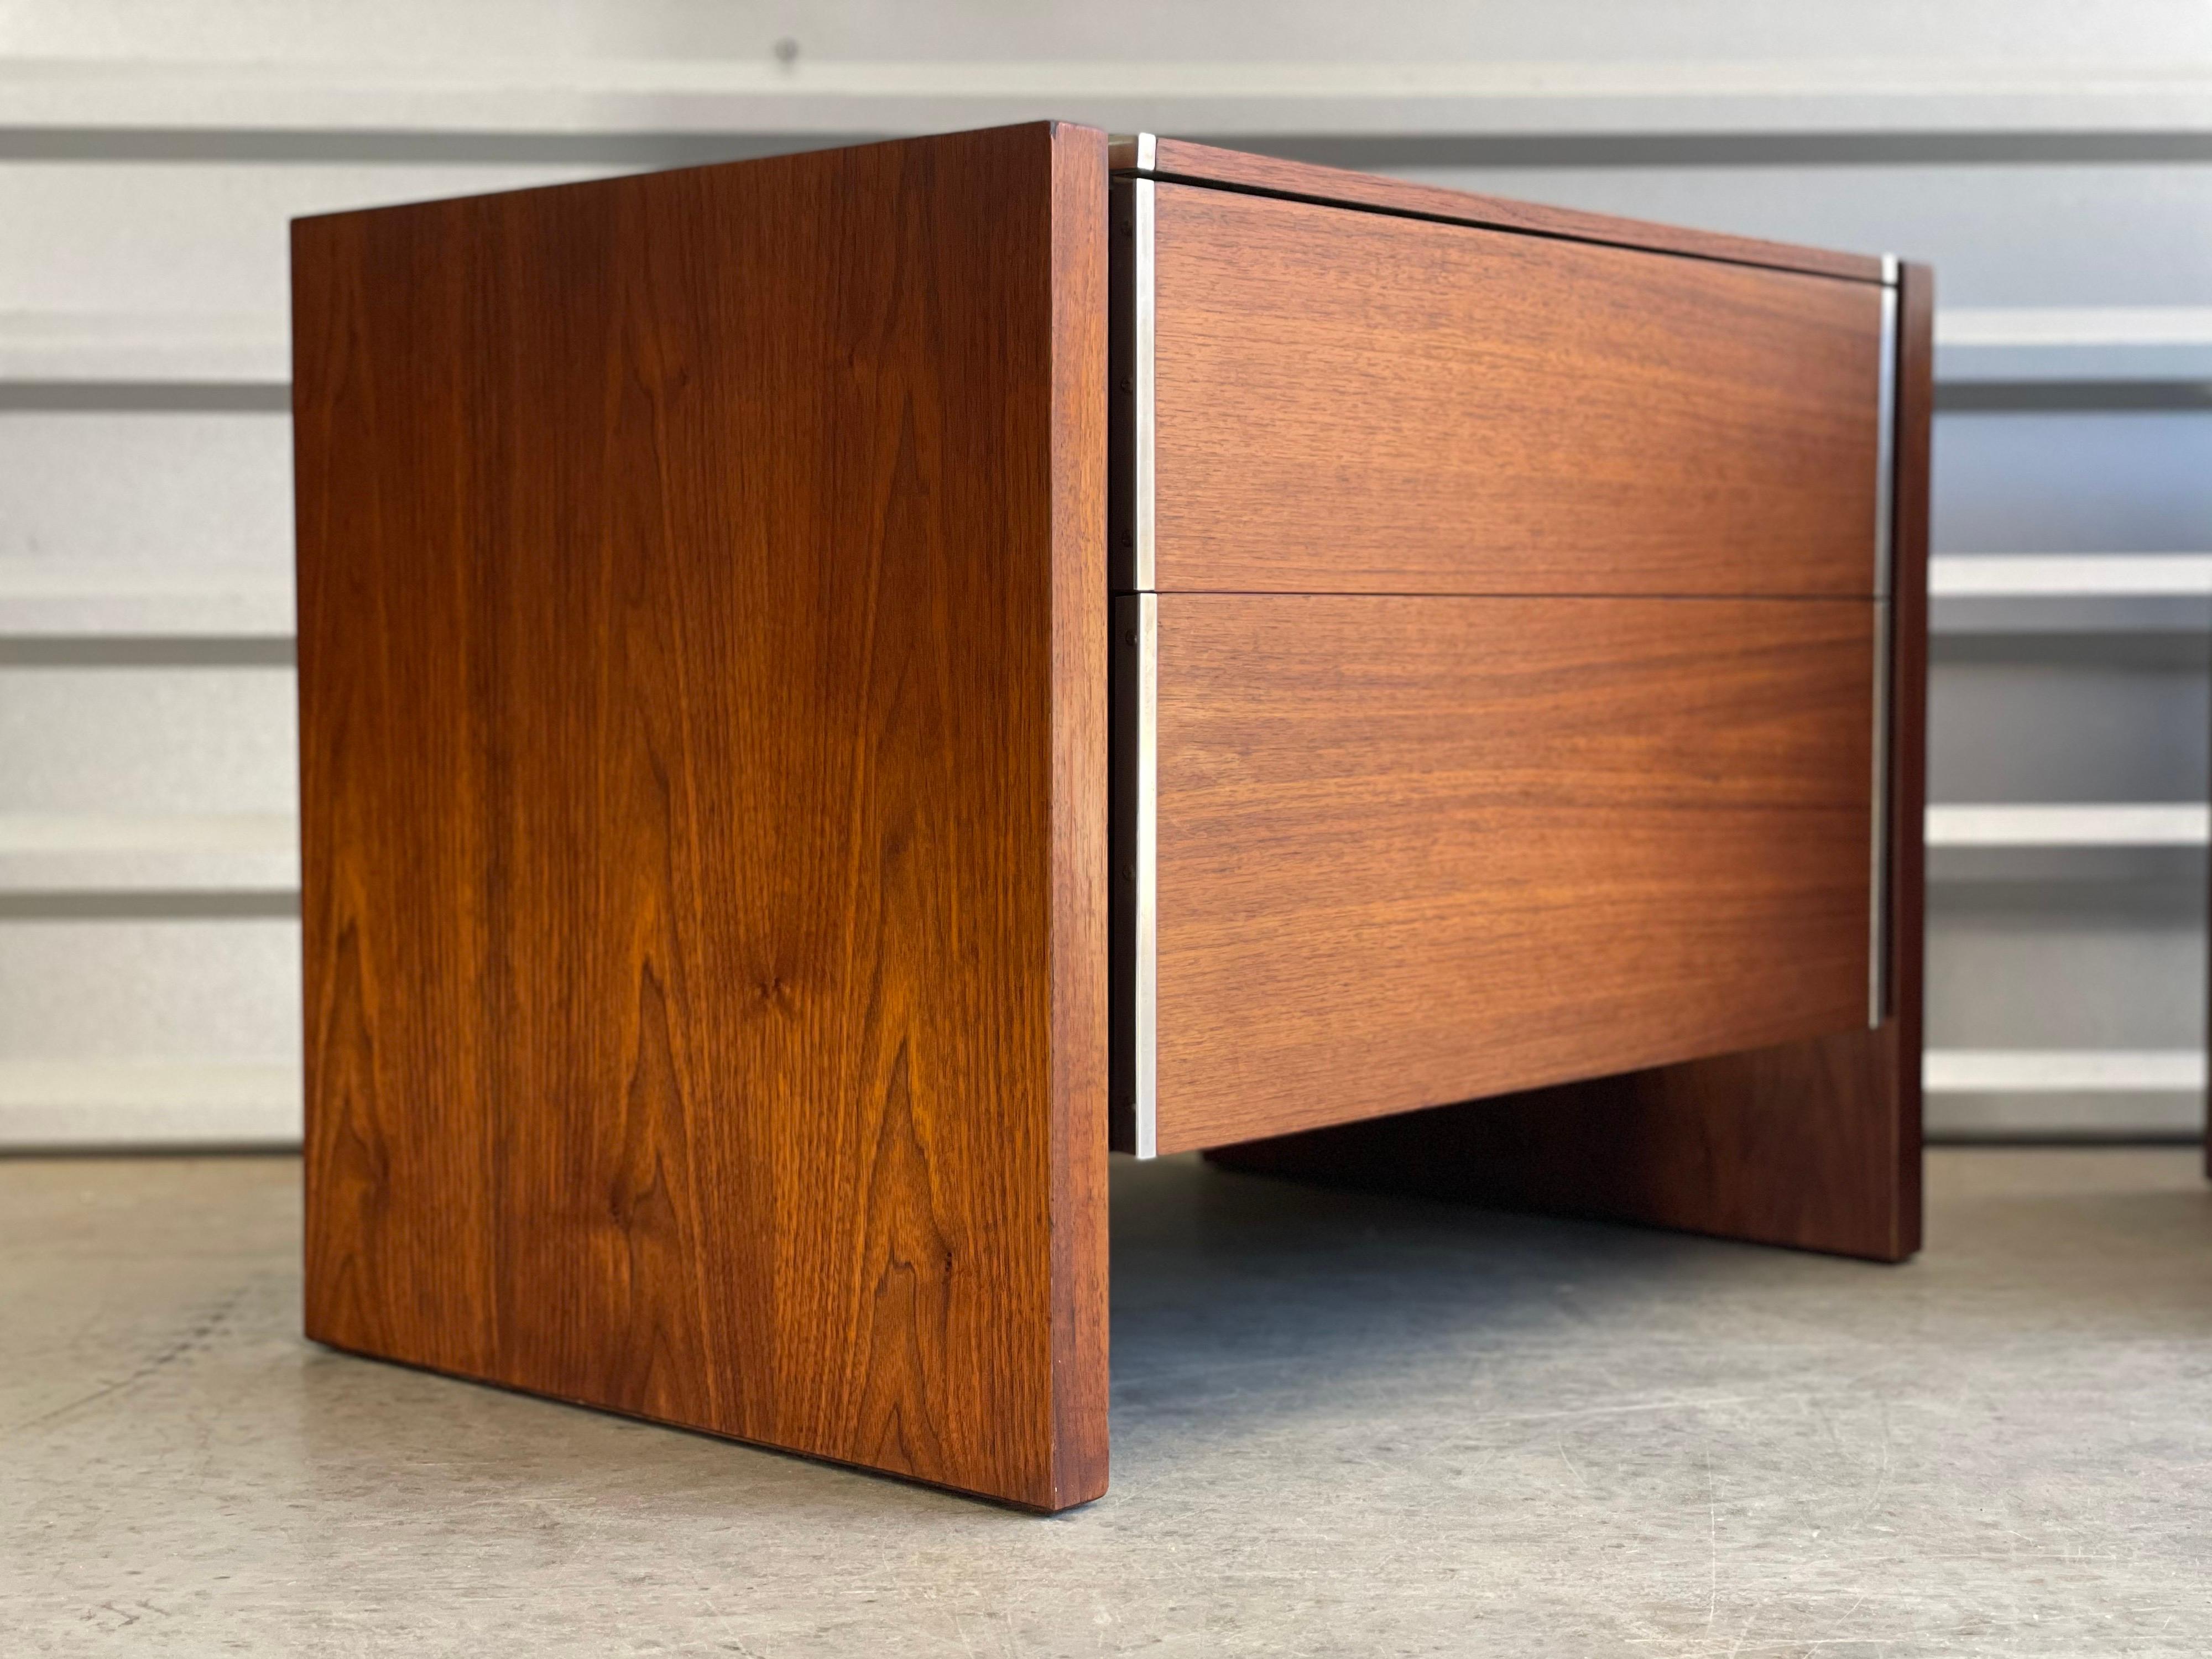 North American Pair of Midcentury Nightstands by Robert Baron for Glenn of California in Walnut